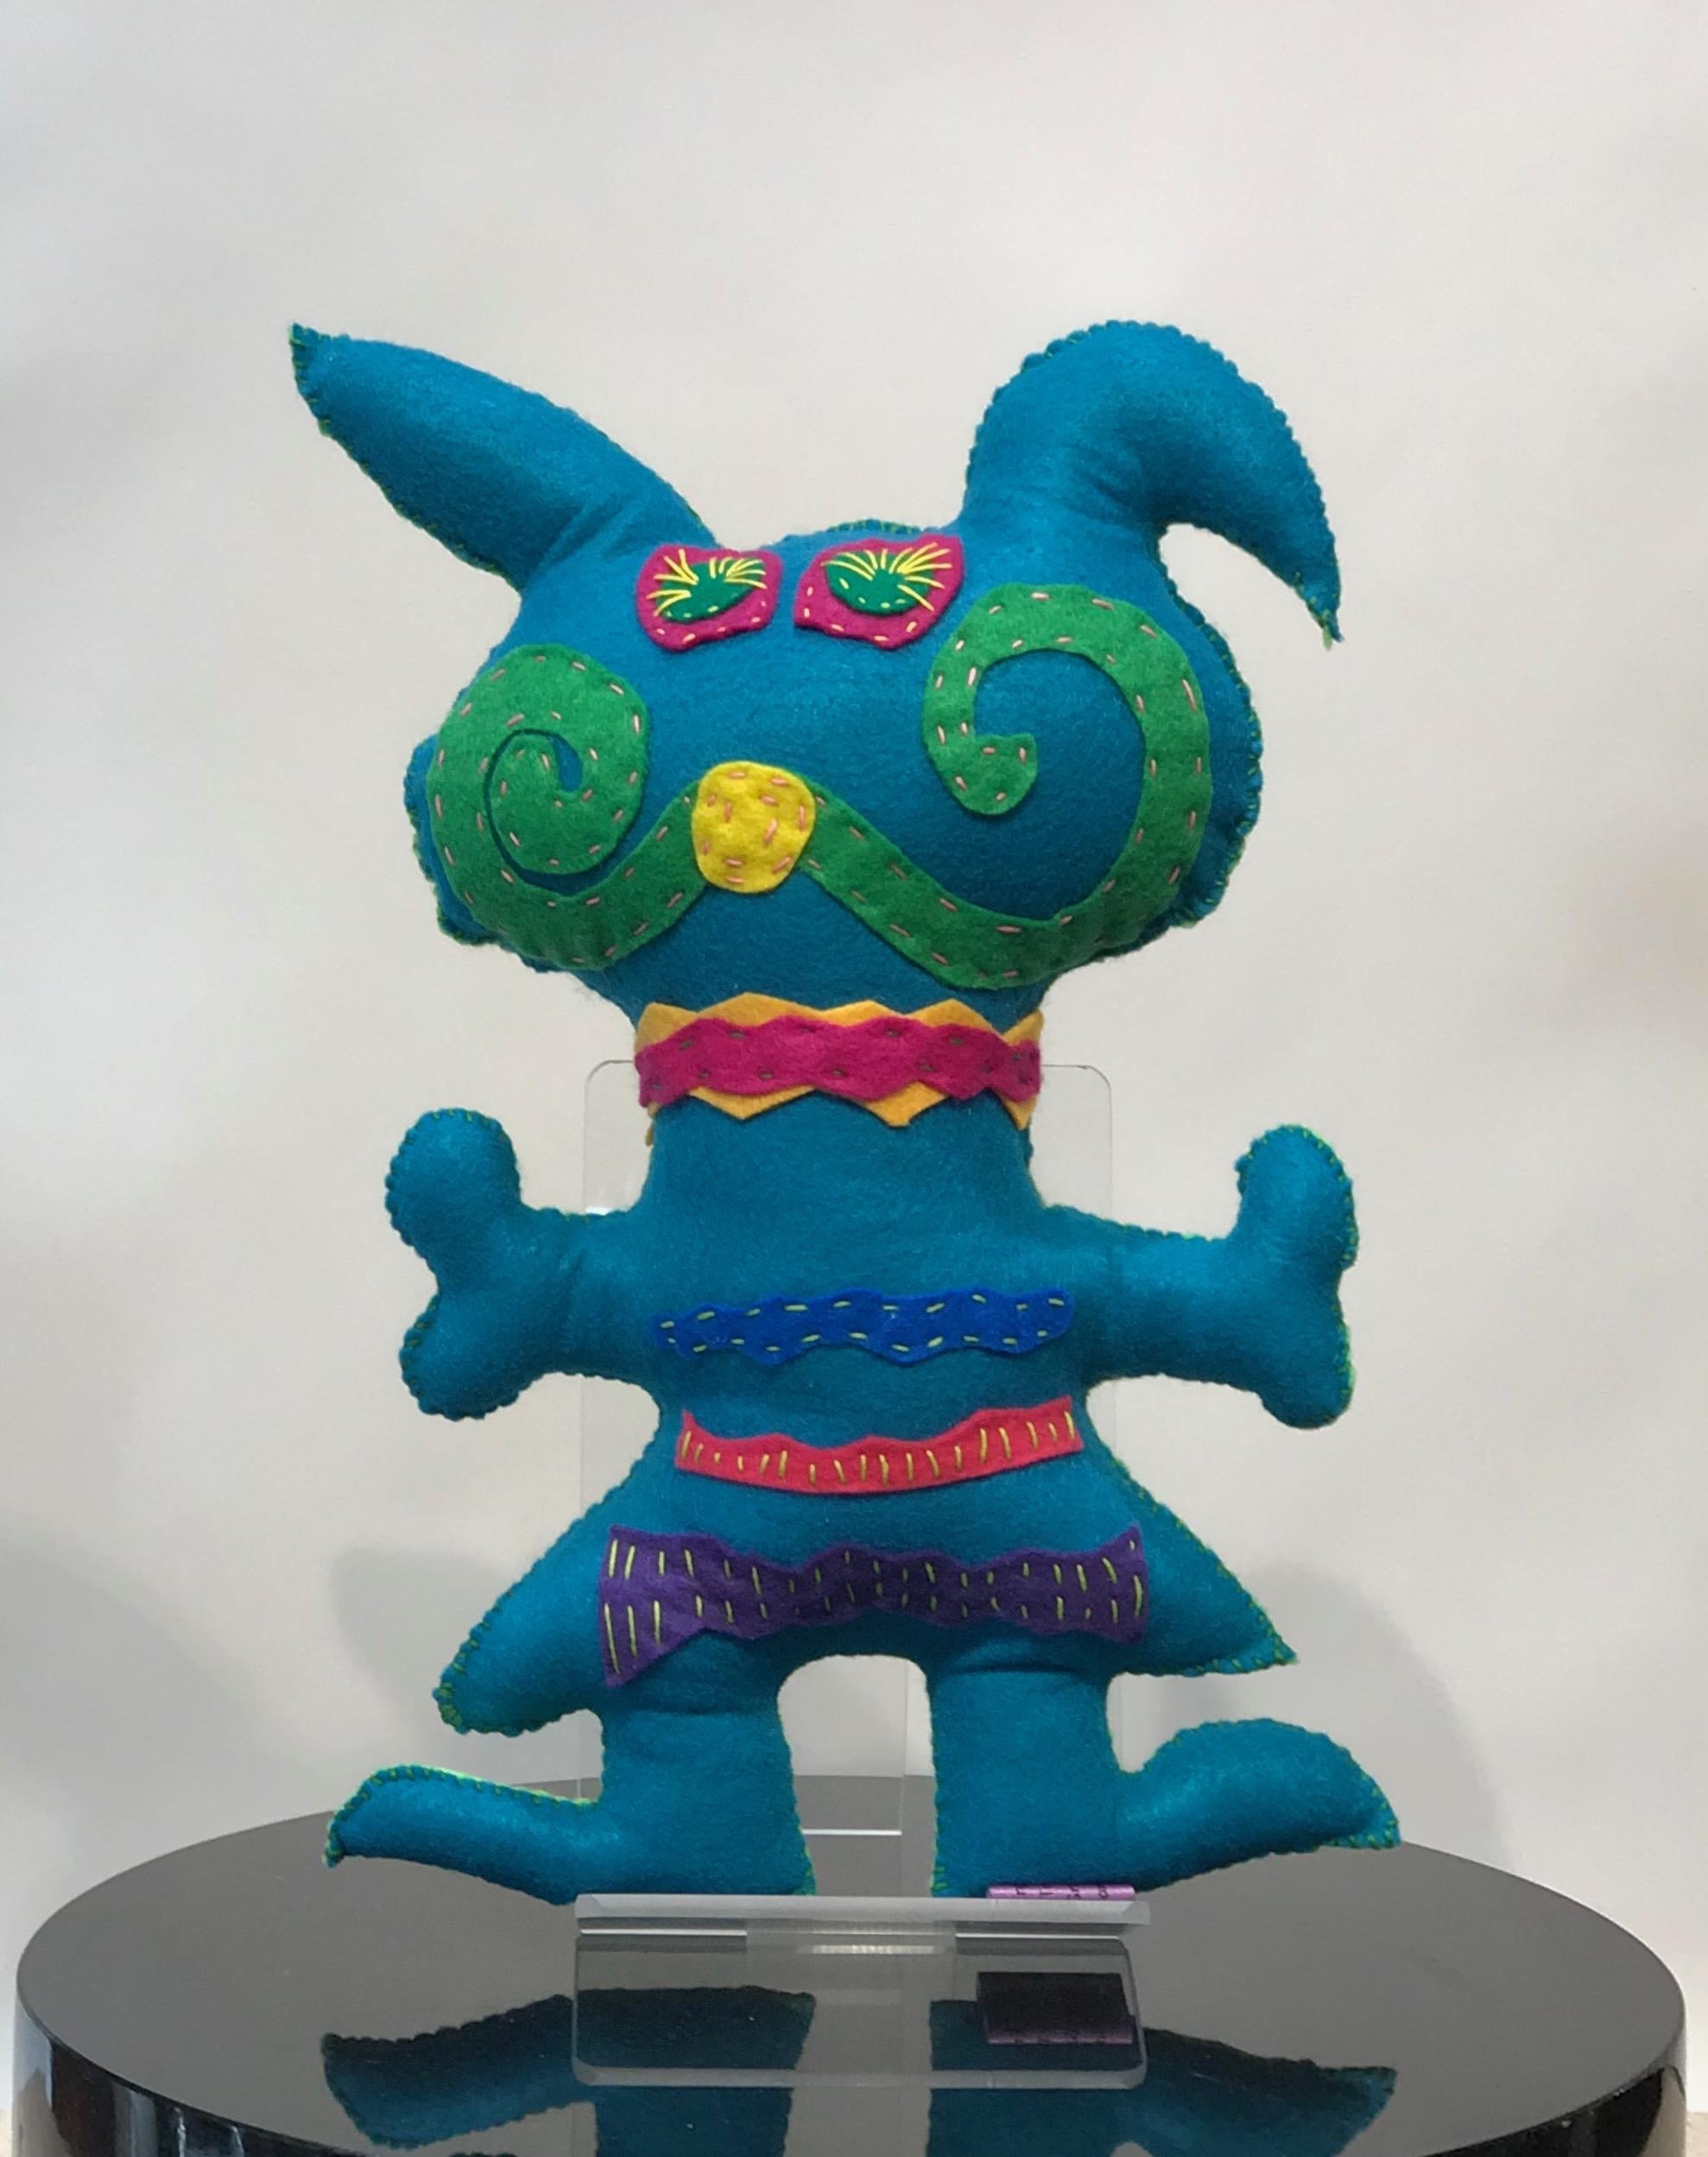 Kerry Green Figurative Sculpture - Teal and Lime Free Range Critter, soft sculpture, felt, recycled materials